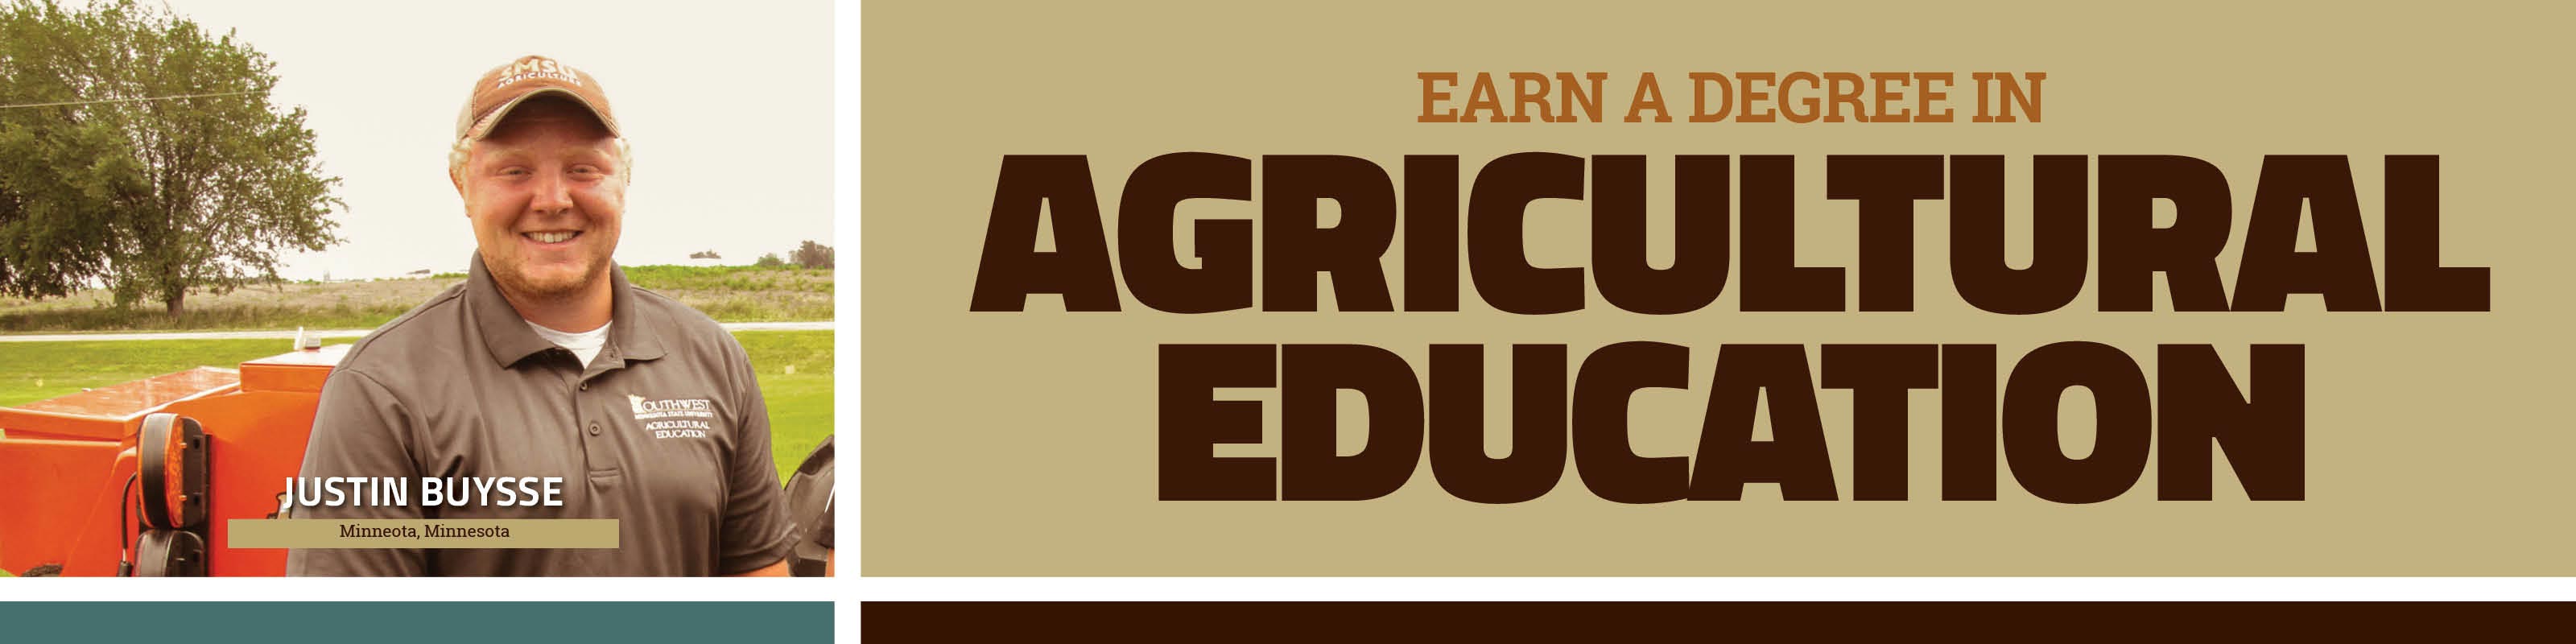 Earn A Degree In Agricultural Education - Discover. Engage. Lead.